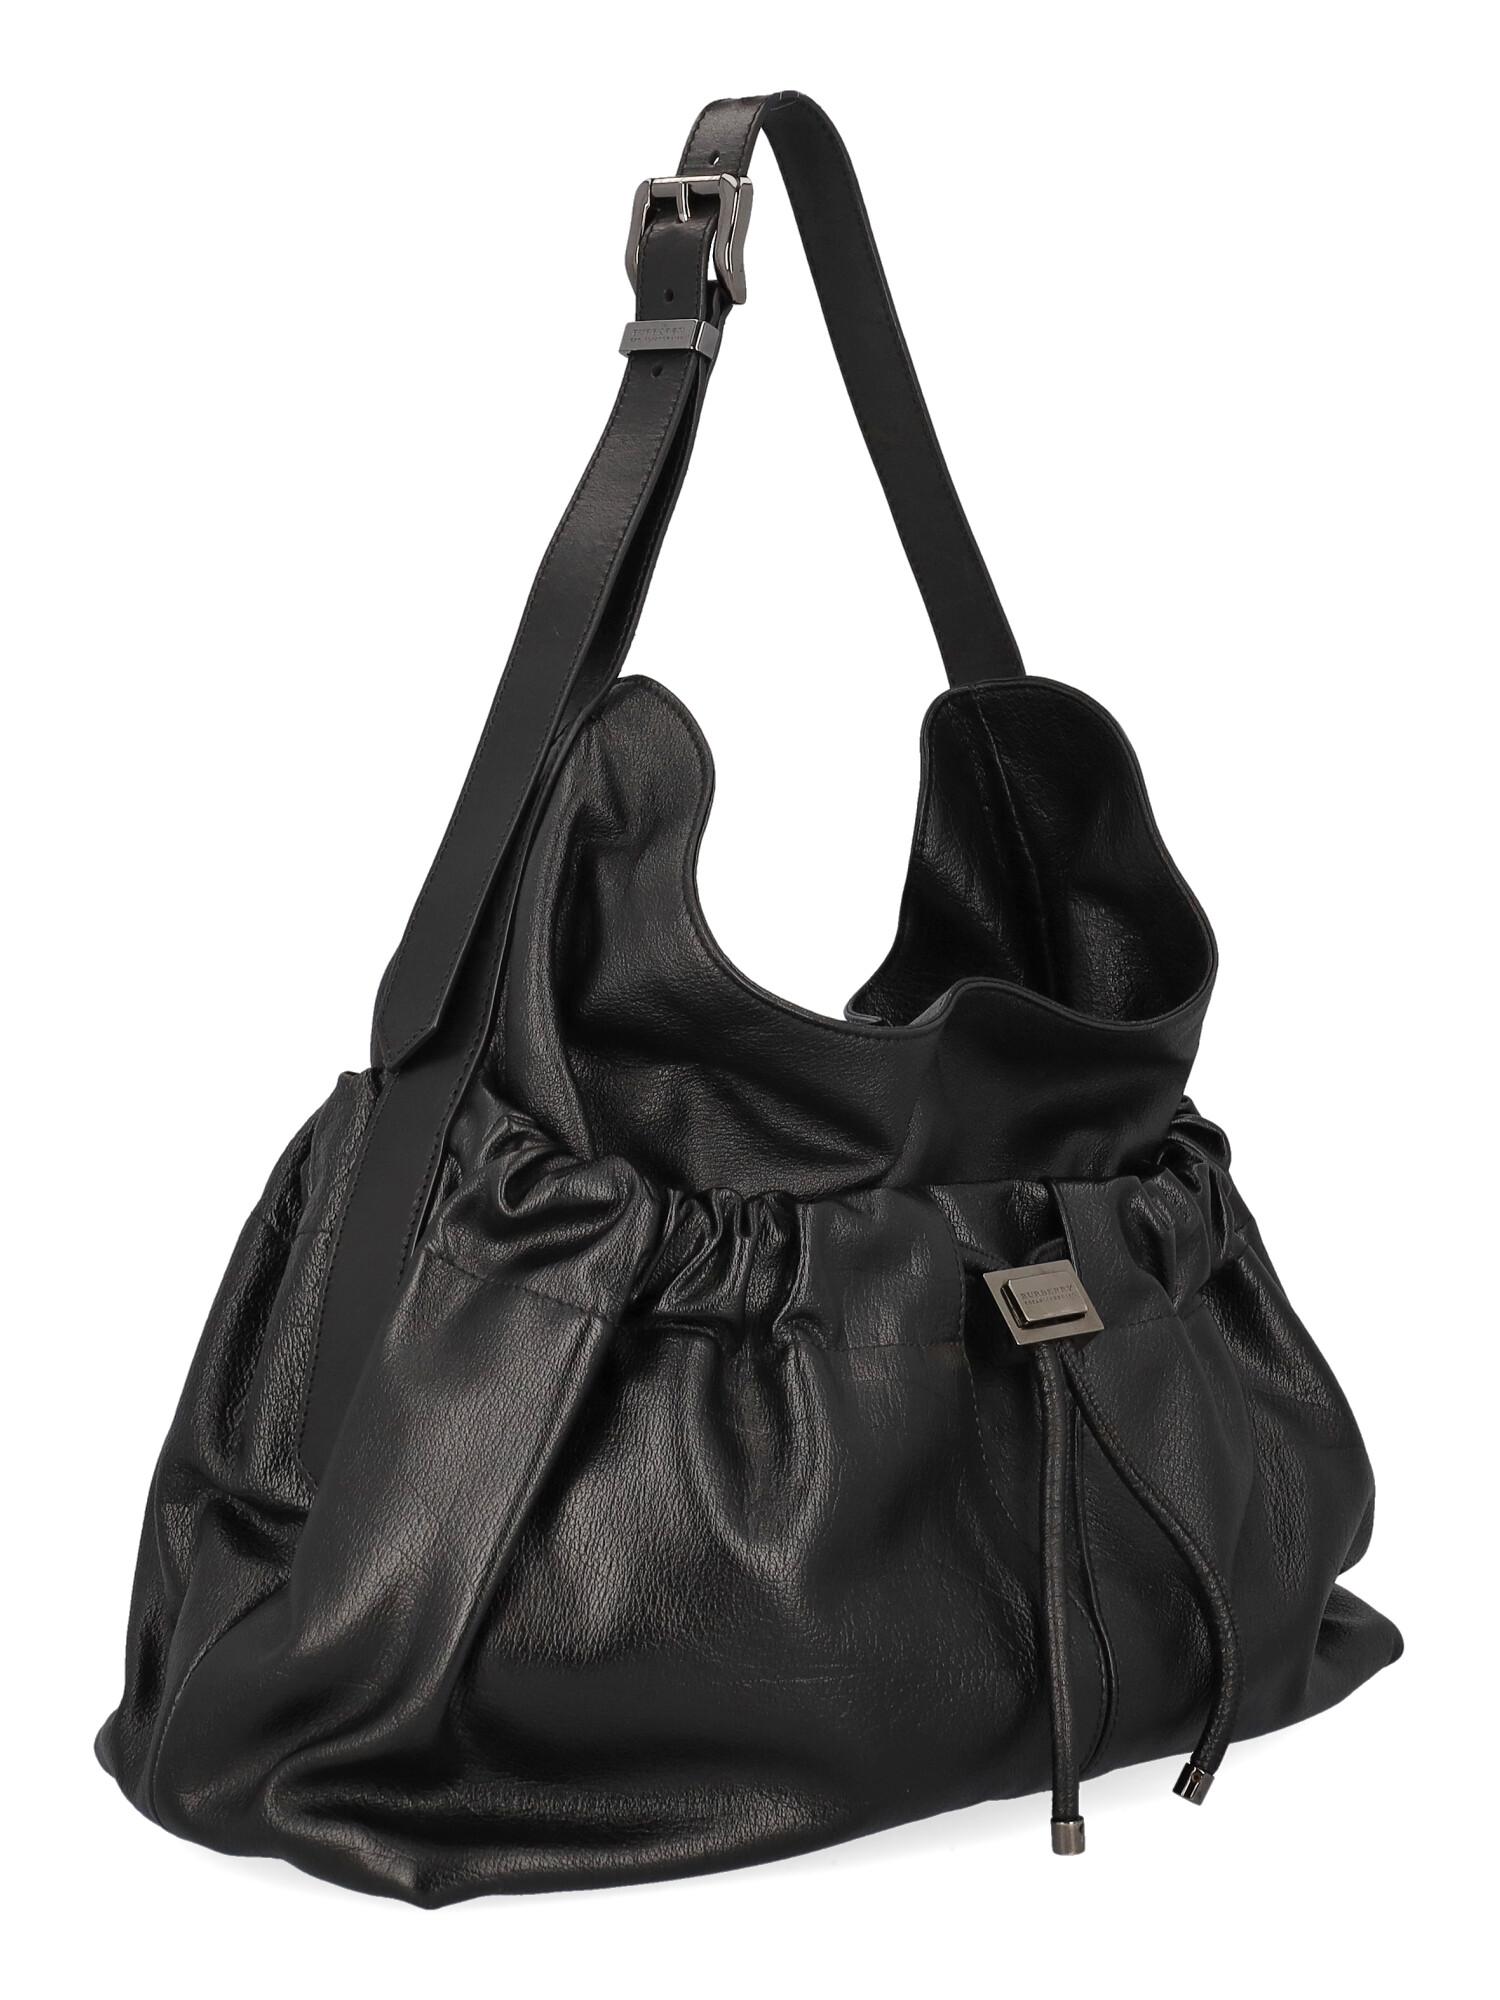 Burberry Women Shoulder bags Black Leather  In Good Condition For Sale In Milan, IT